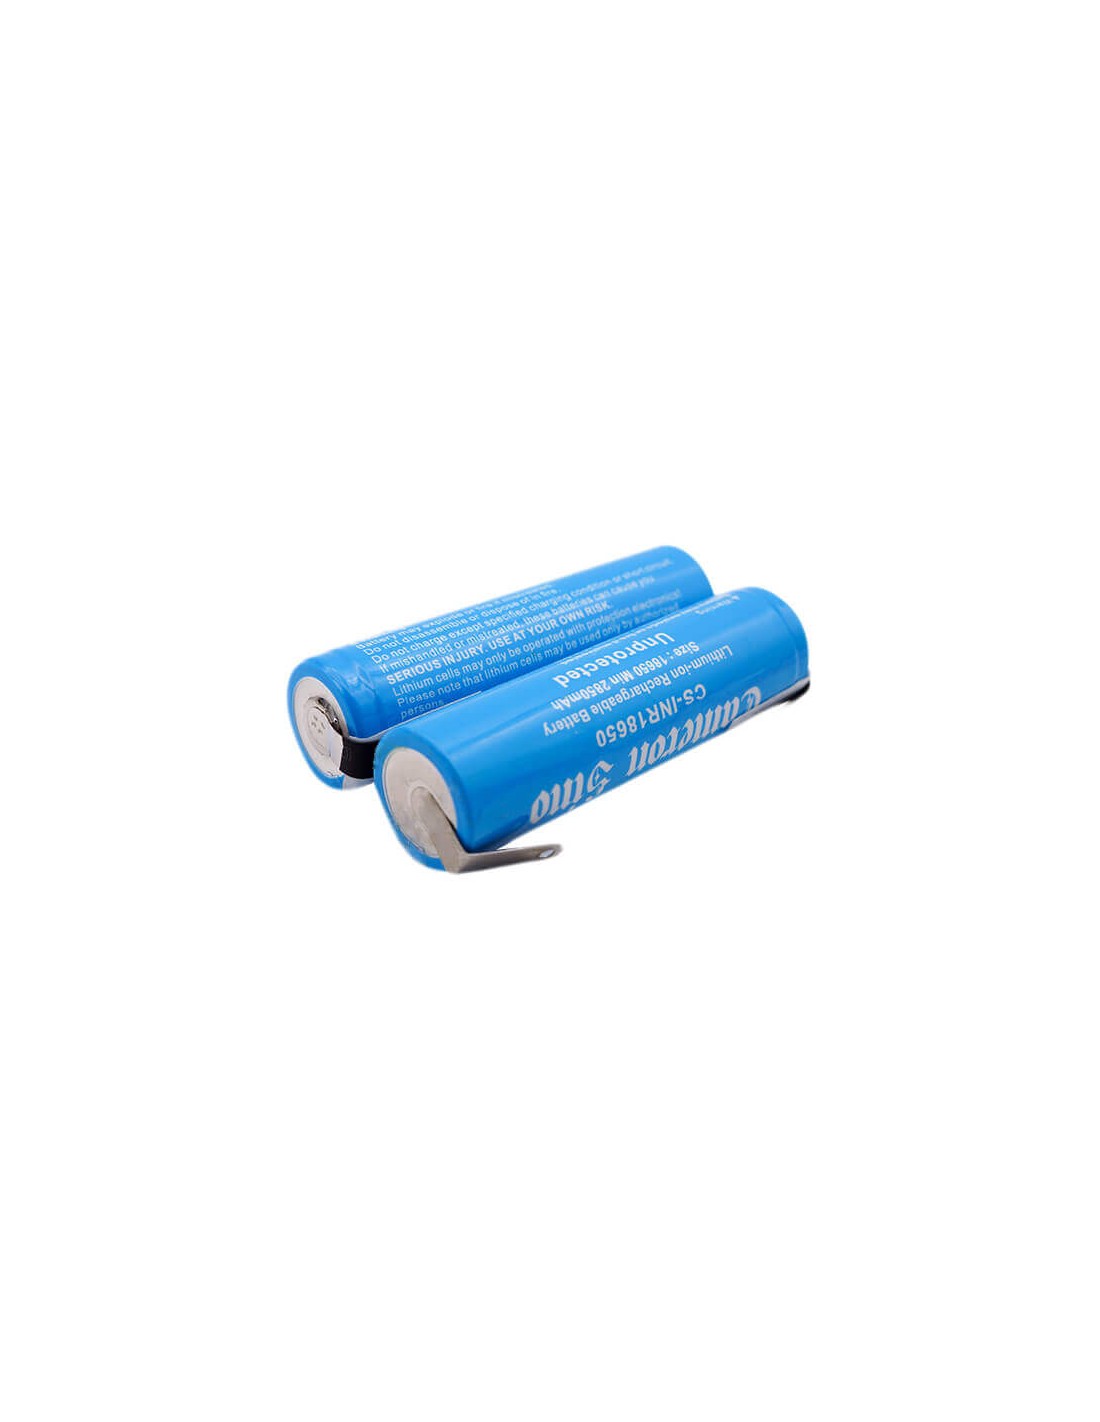 Battery for Lithium Ion, 2pcs Pack with With Tabs 3.7V, 2900mAh - 10.73Wh